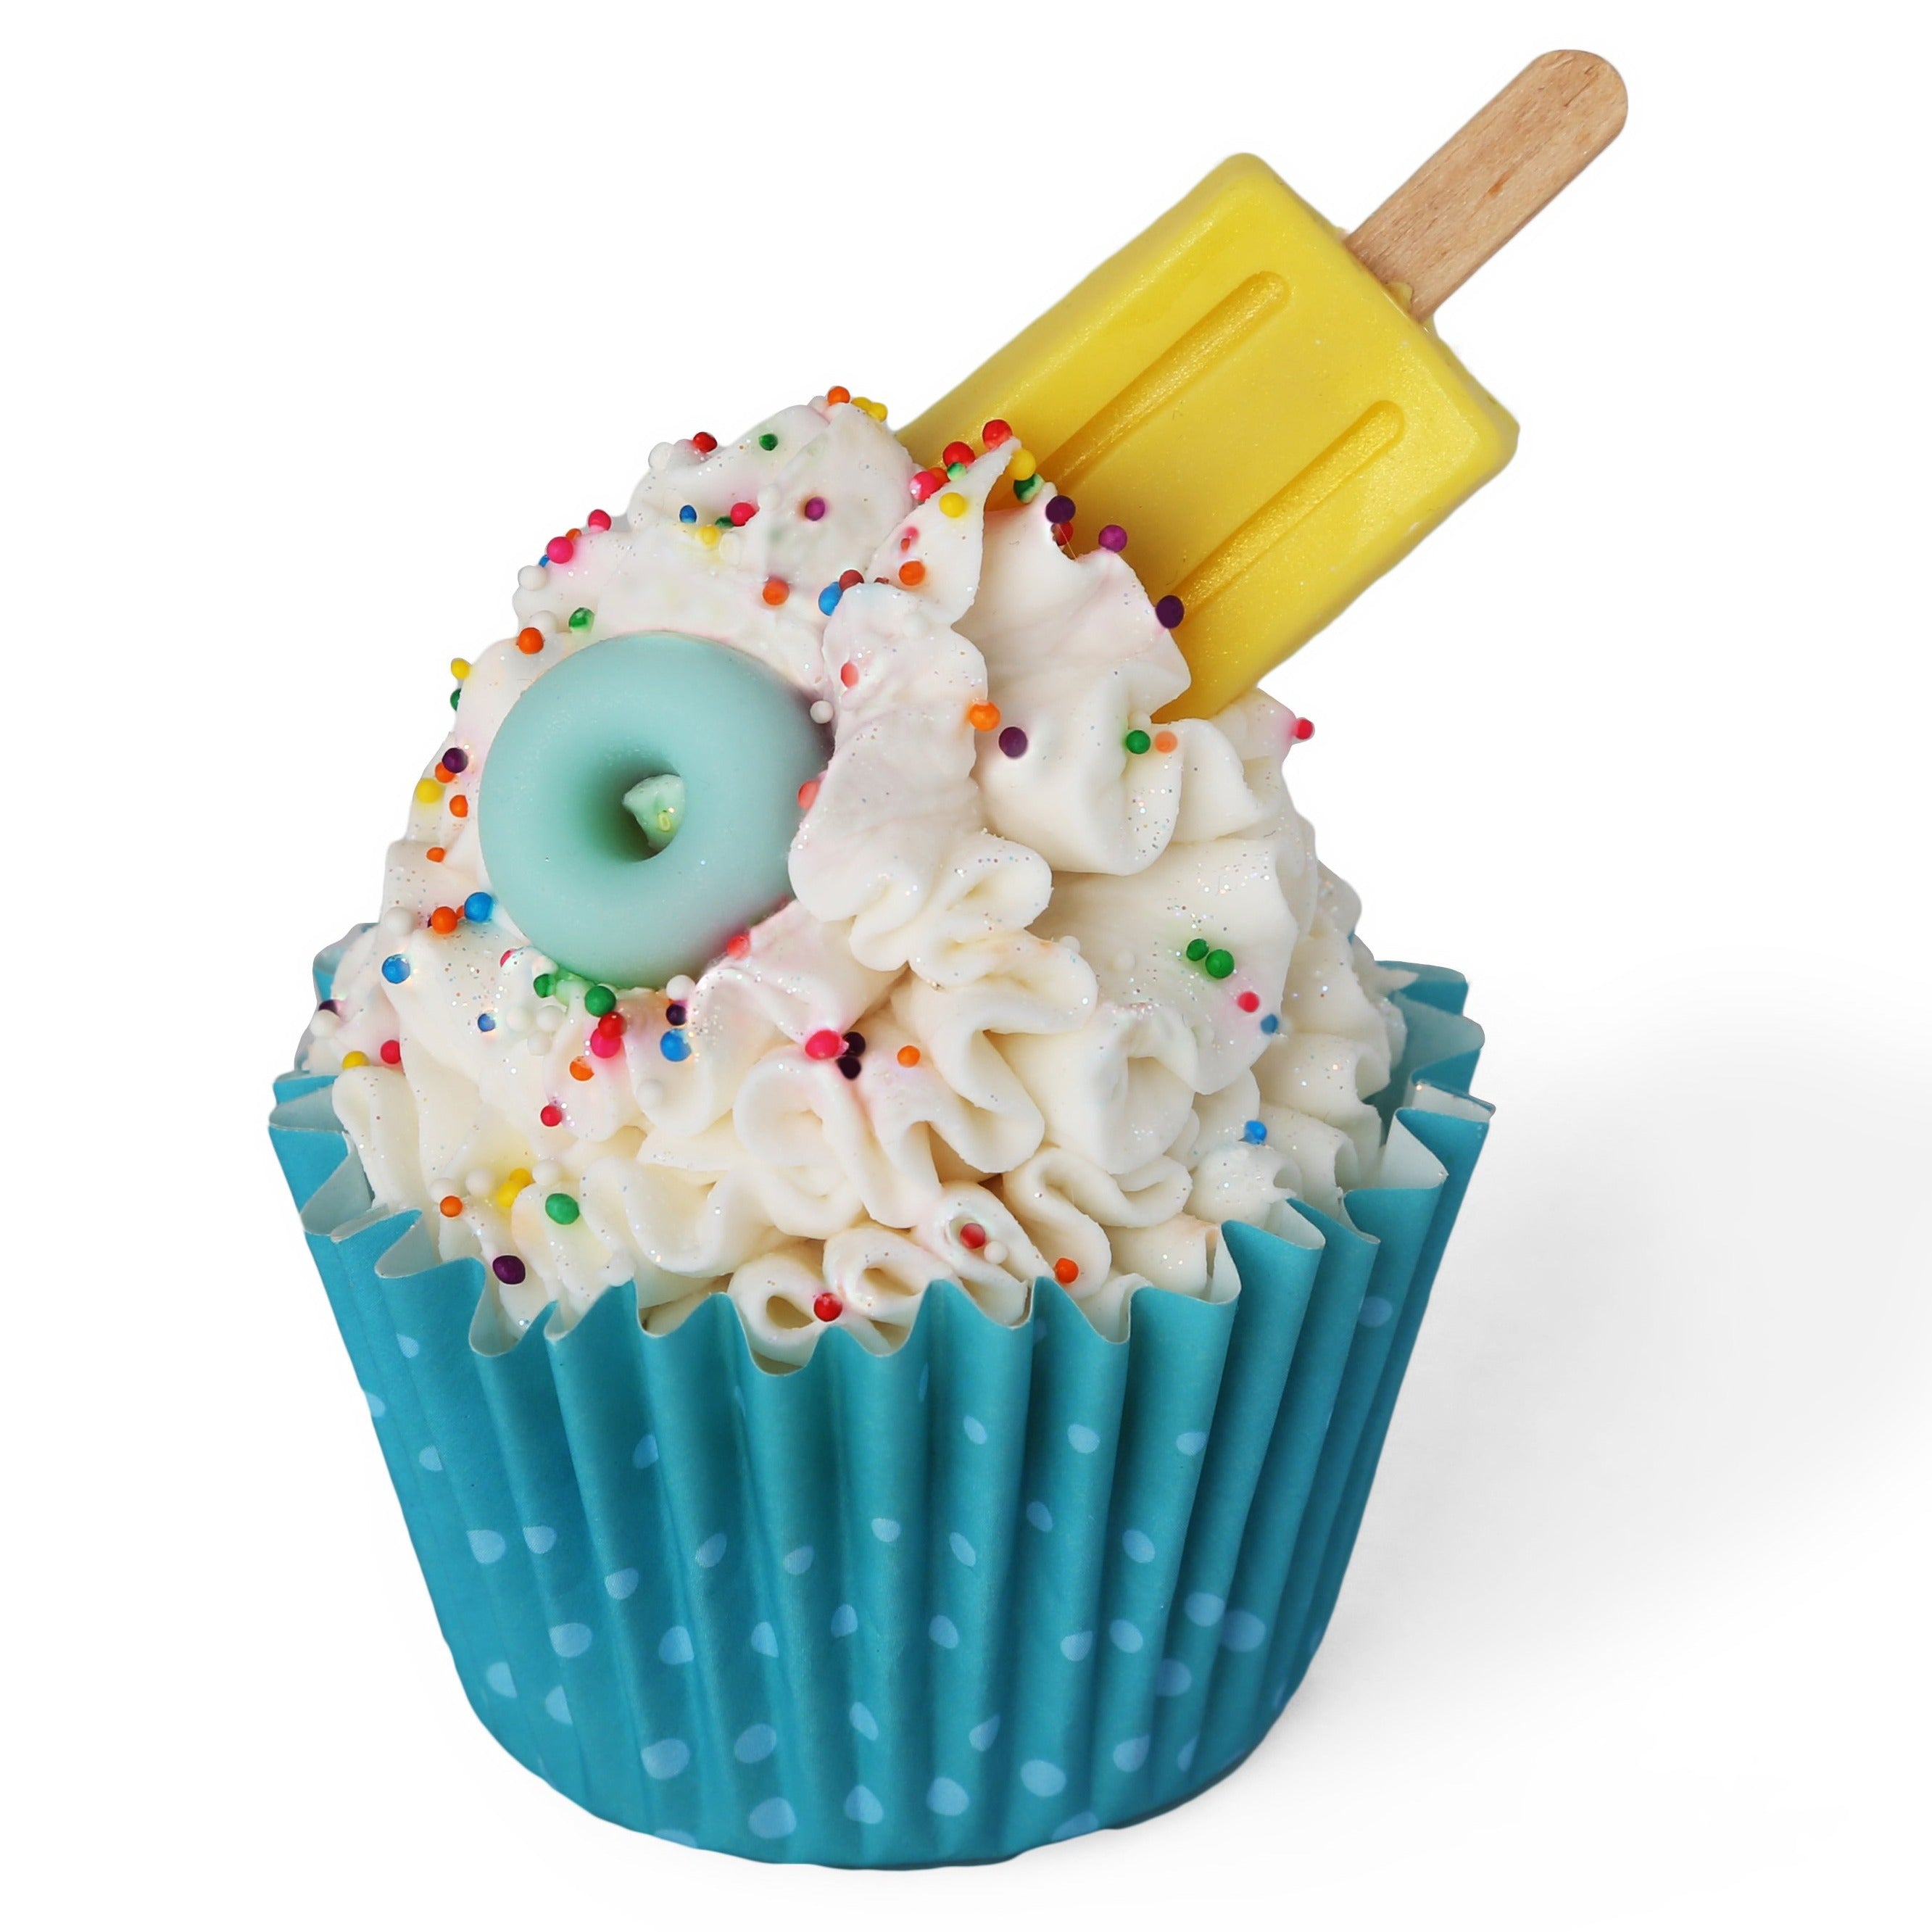 Pool party themed soap cupcake. Blue liner with dots. White soap frosting with colorful sprinkles, topped with a light blue floatie and a small yellow popsicle